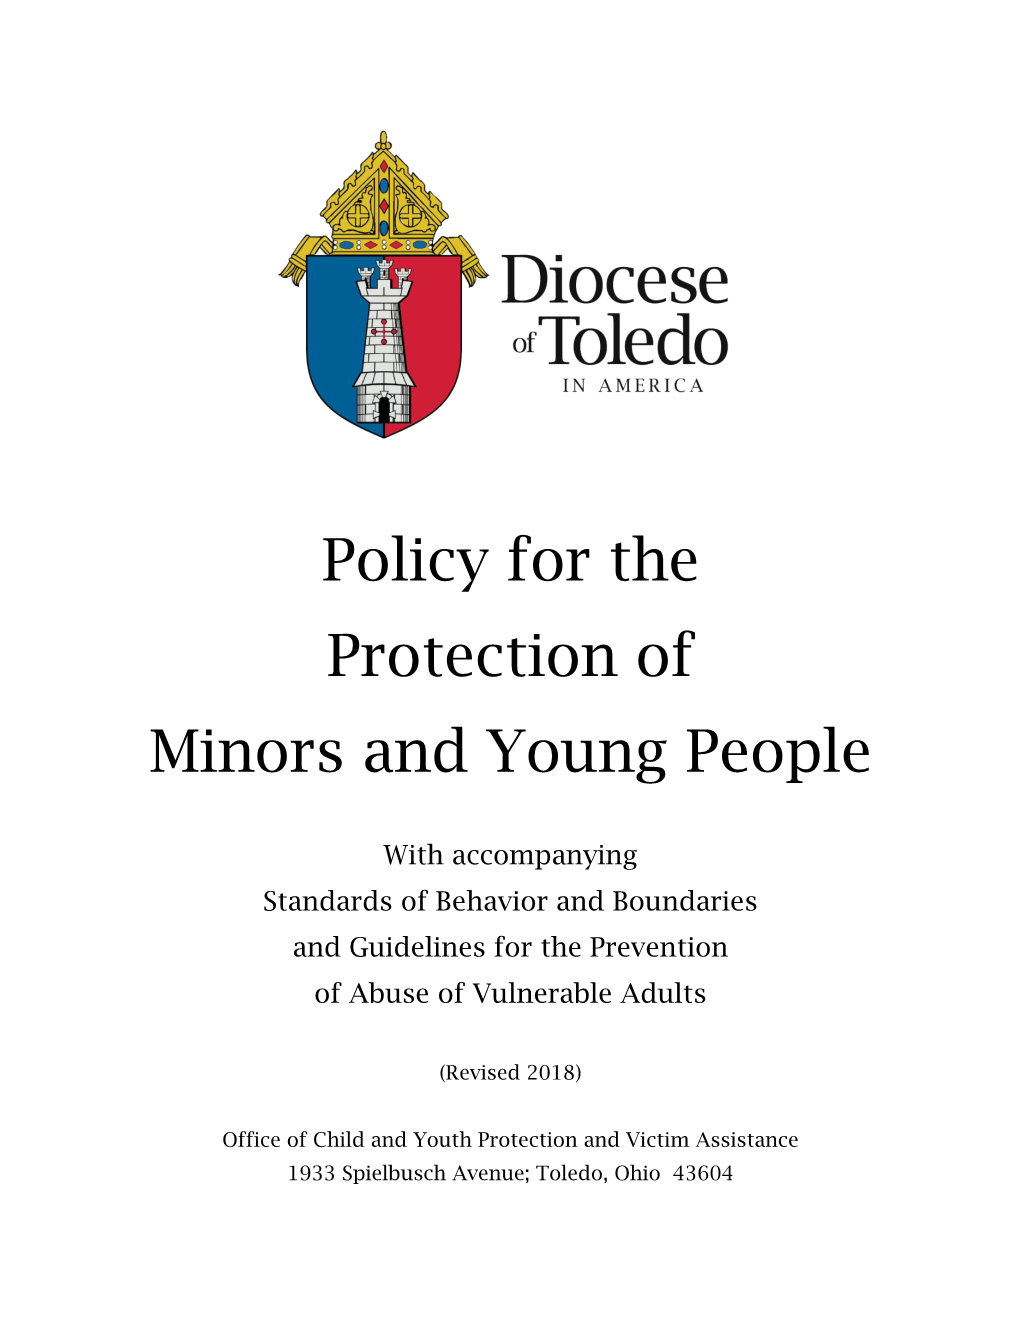 Policy for the Protection of Minors and Young People